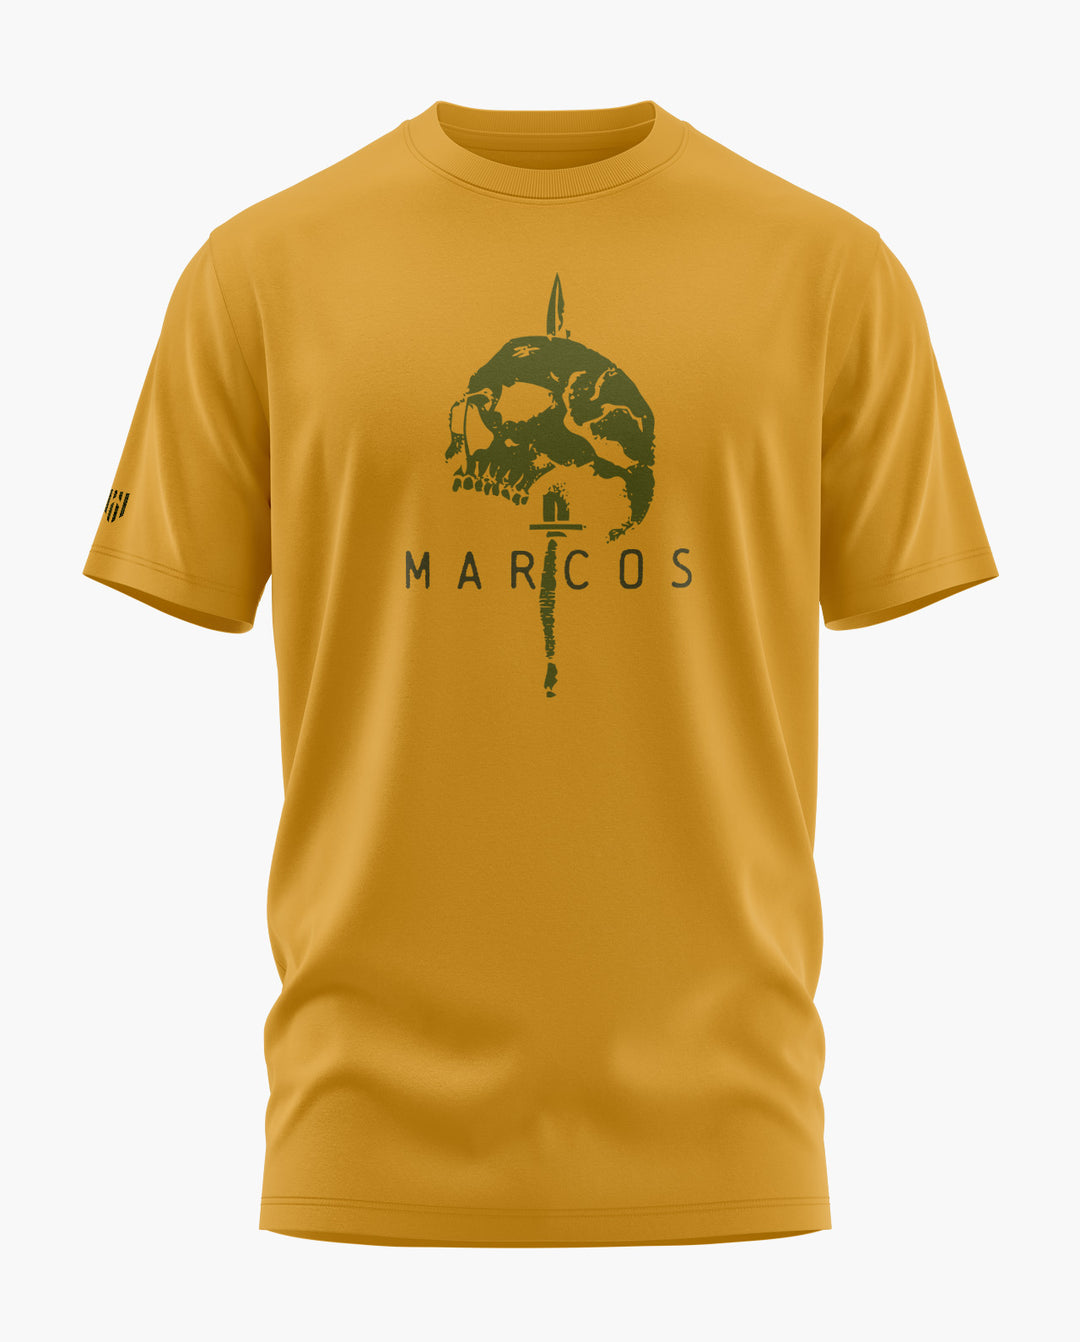 MARCOS SUPREMACY T-Shirt